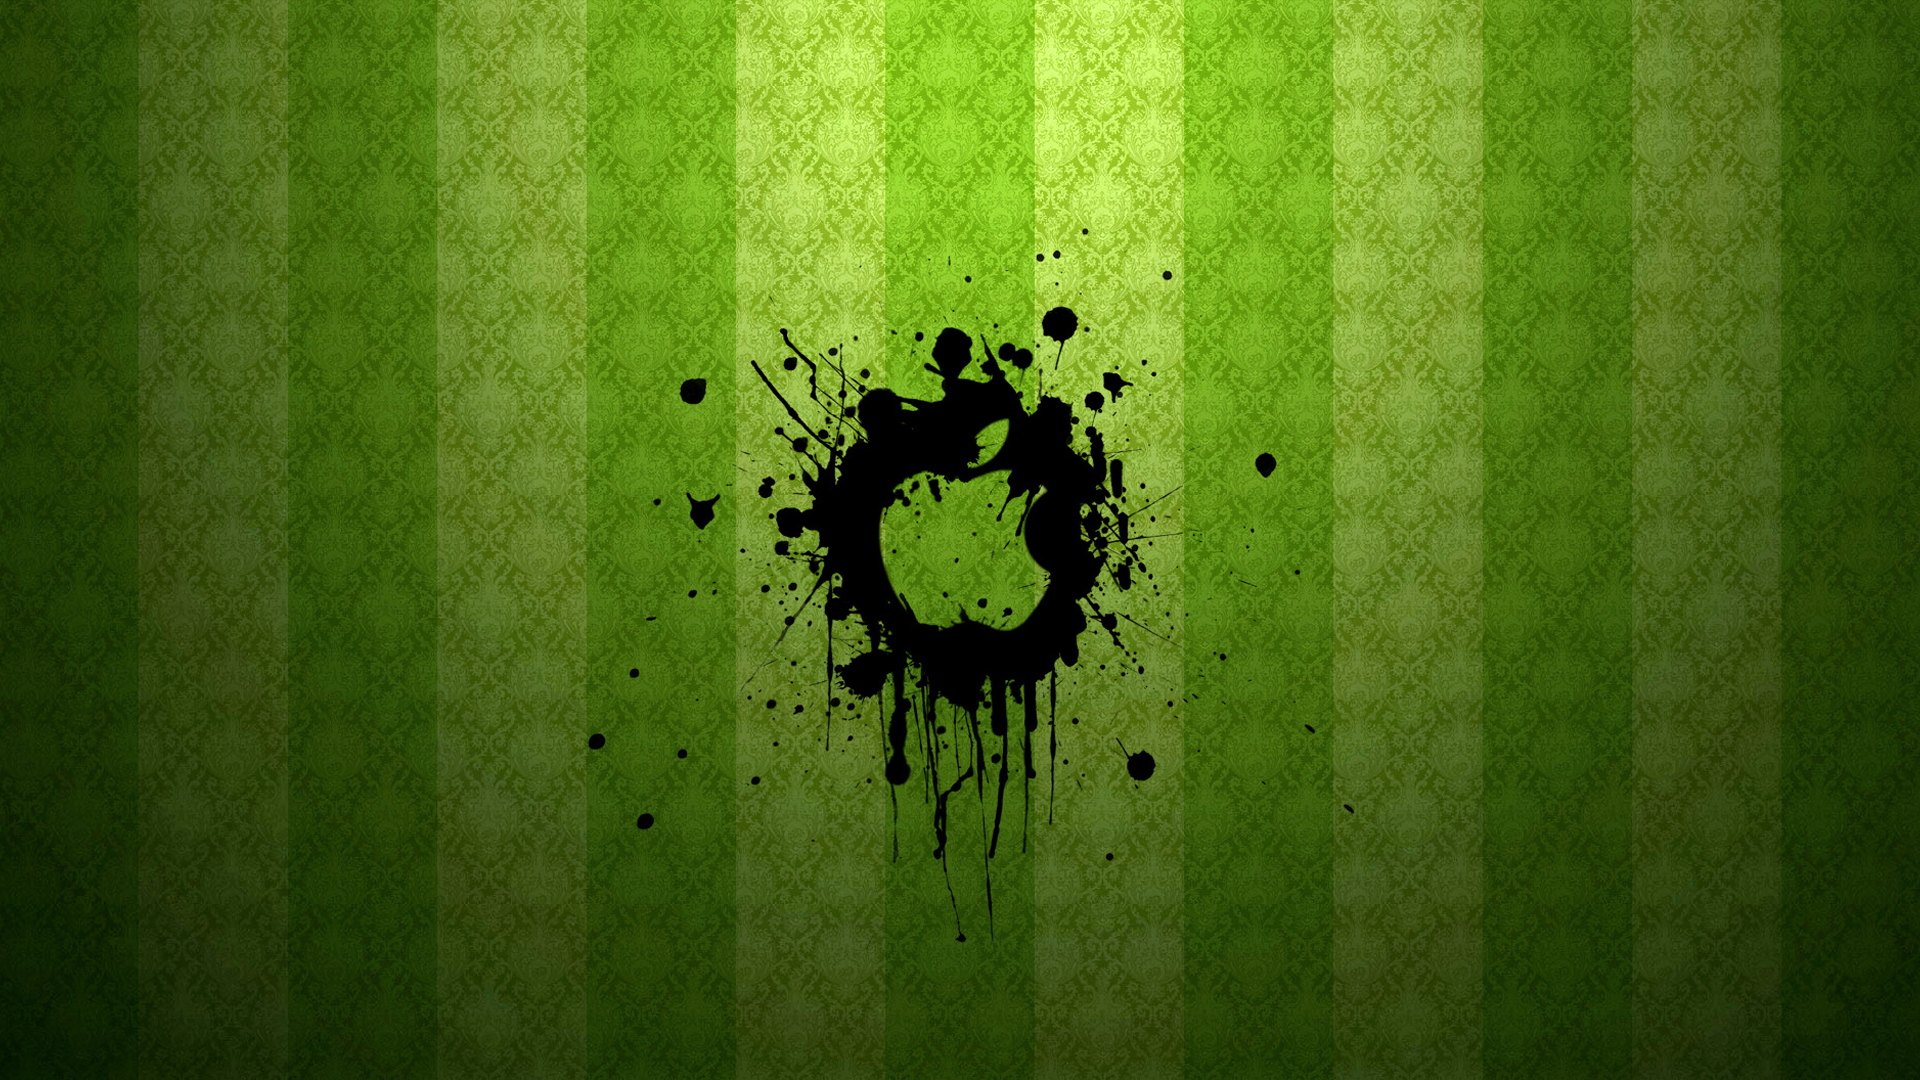 Apple graffiti theme wallpaper Green Backgrounds Pictures and images 1920x1080